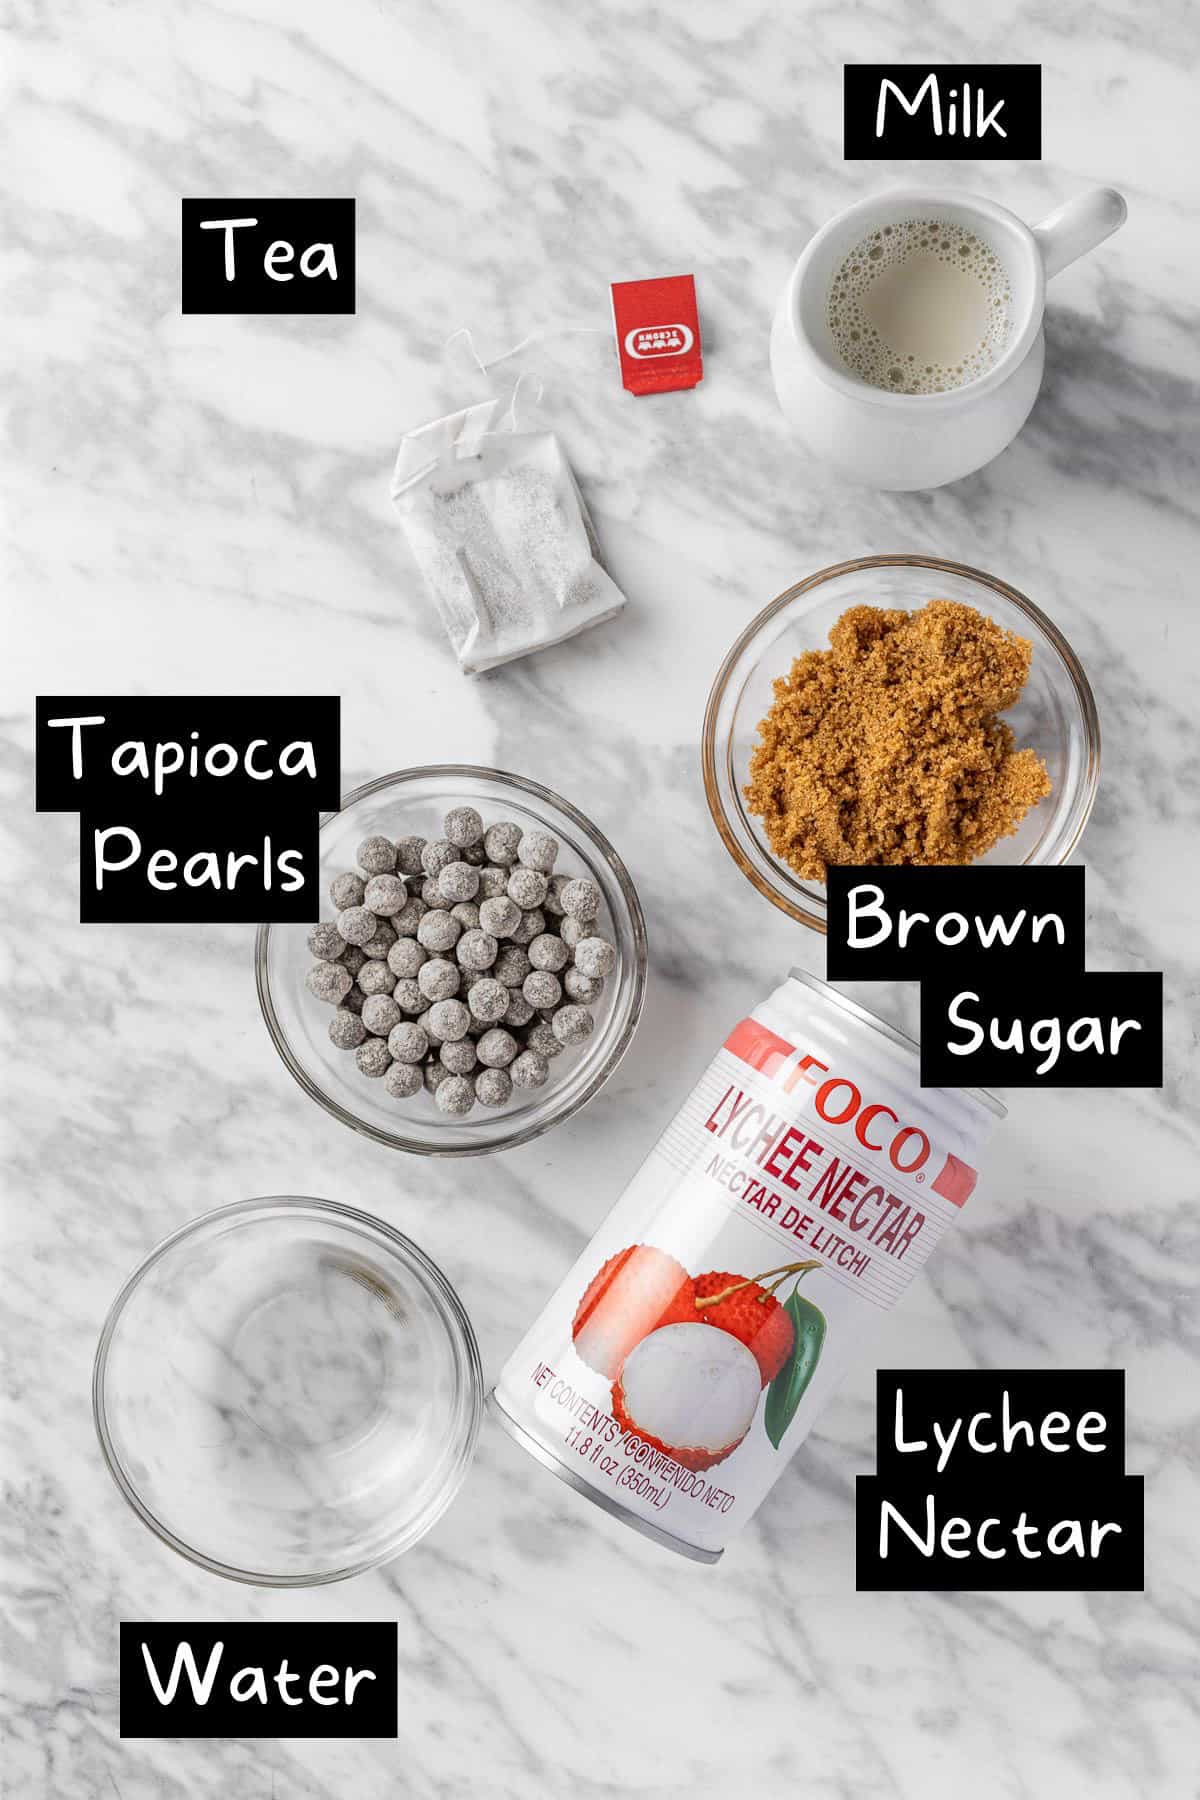 The ingredients needed to make the bubble tea.